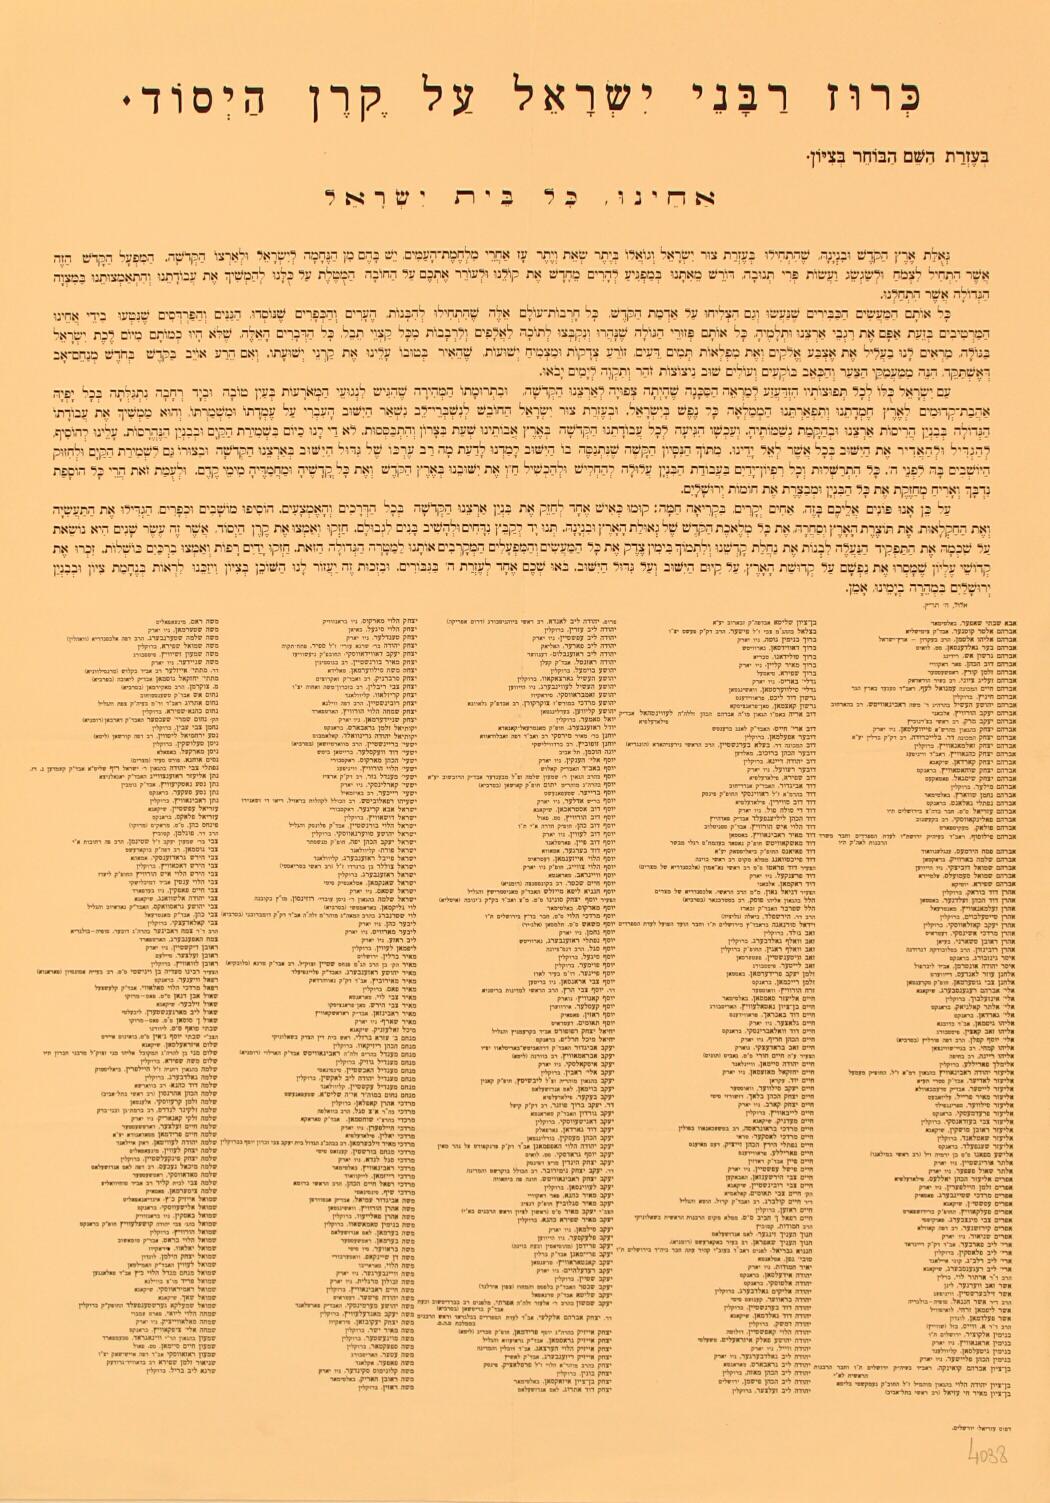 The proclamation of 500 rabbis in 1930, calling to support the activities of Keren Hayesod